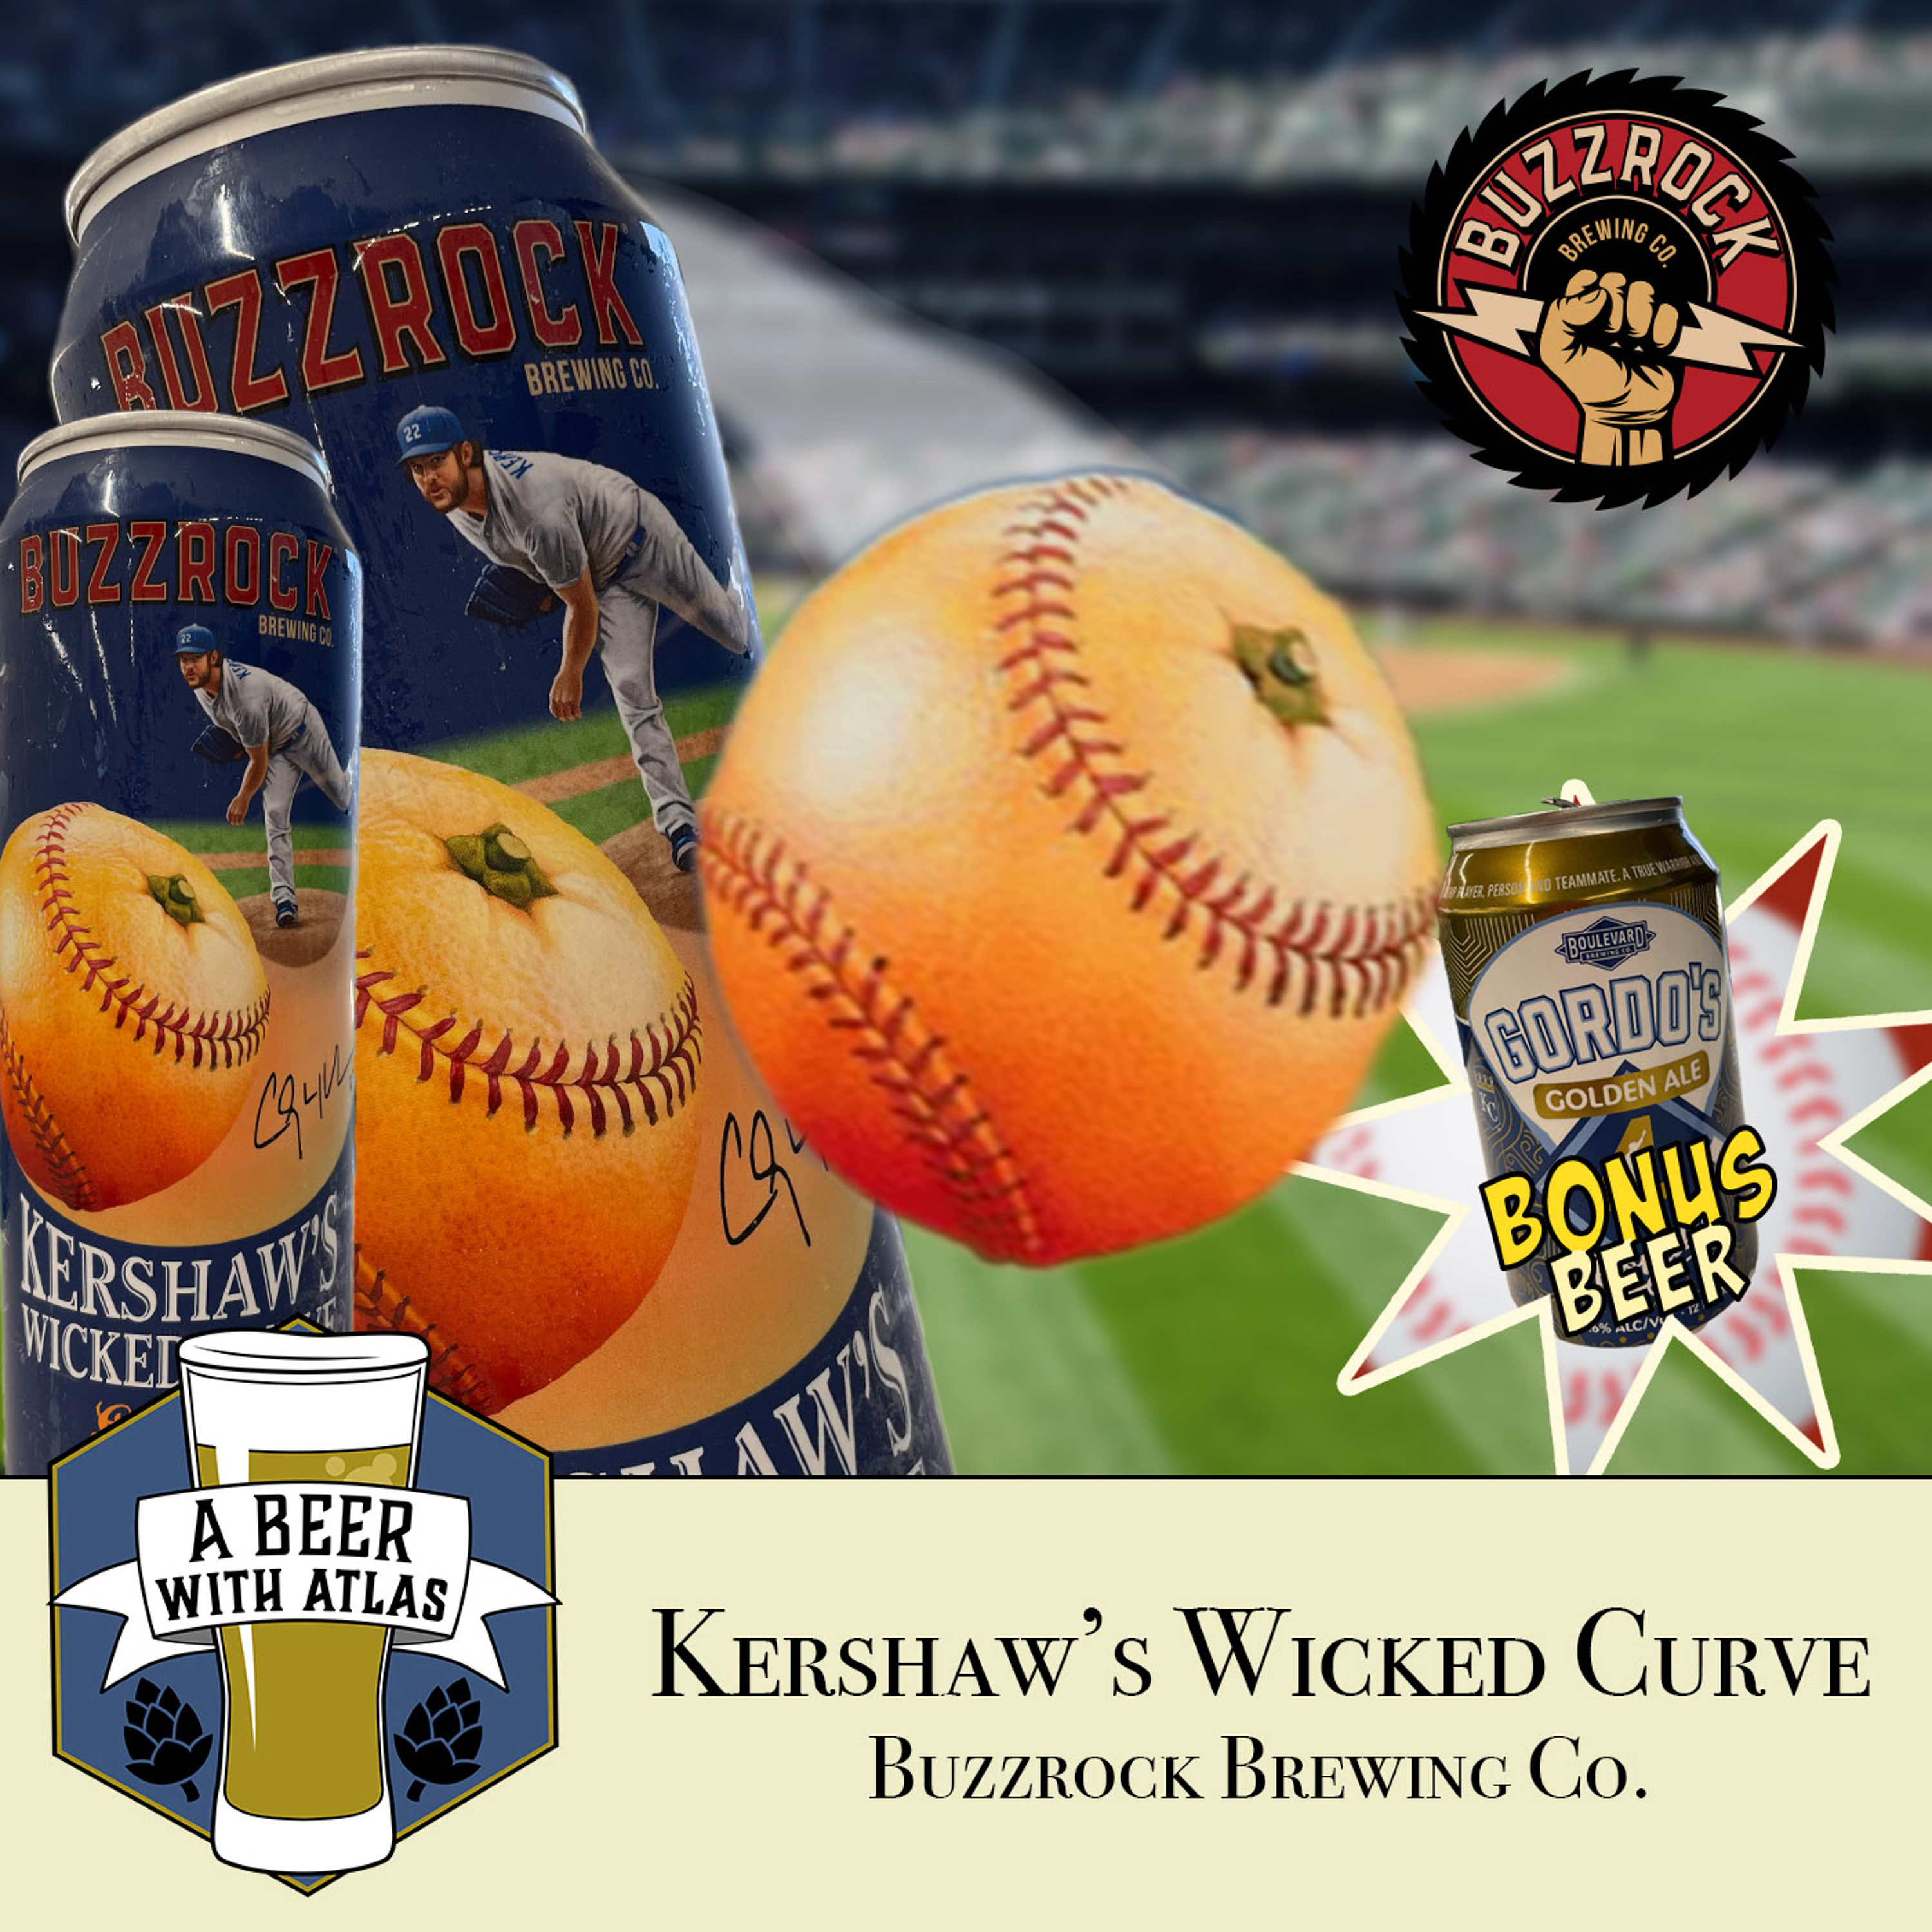 Kershaw's Wicked Curve by Buzzrock Brewing Co. - A Beer with Atlas 192